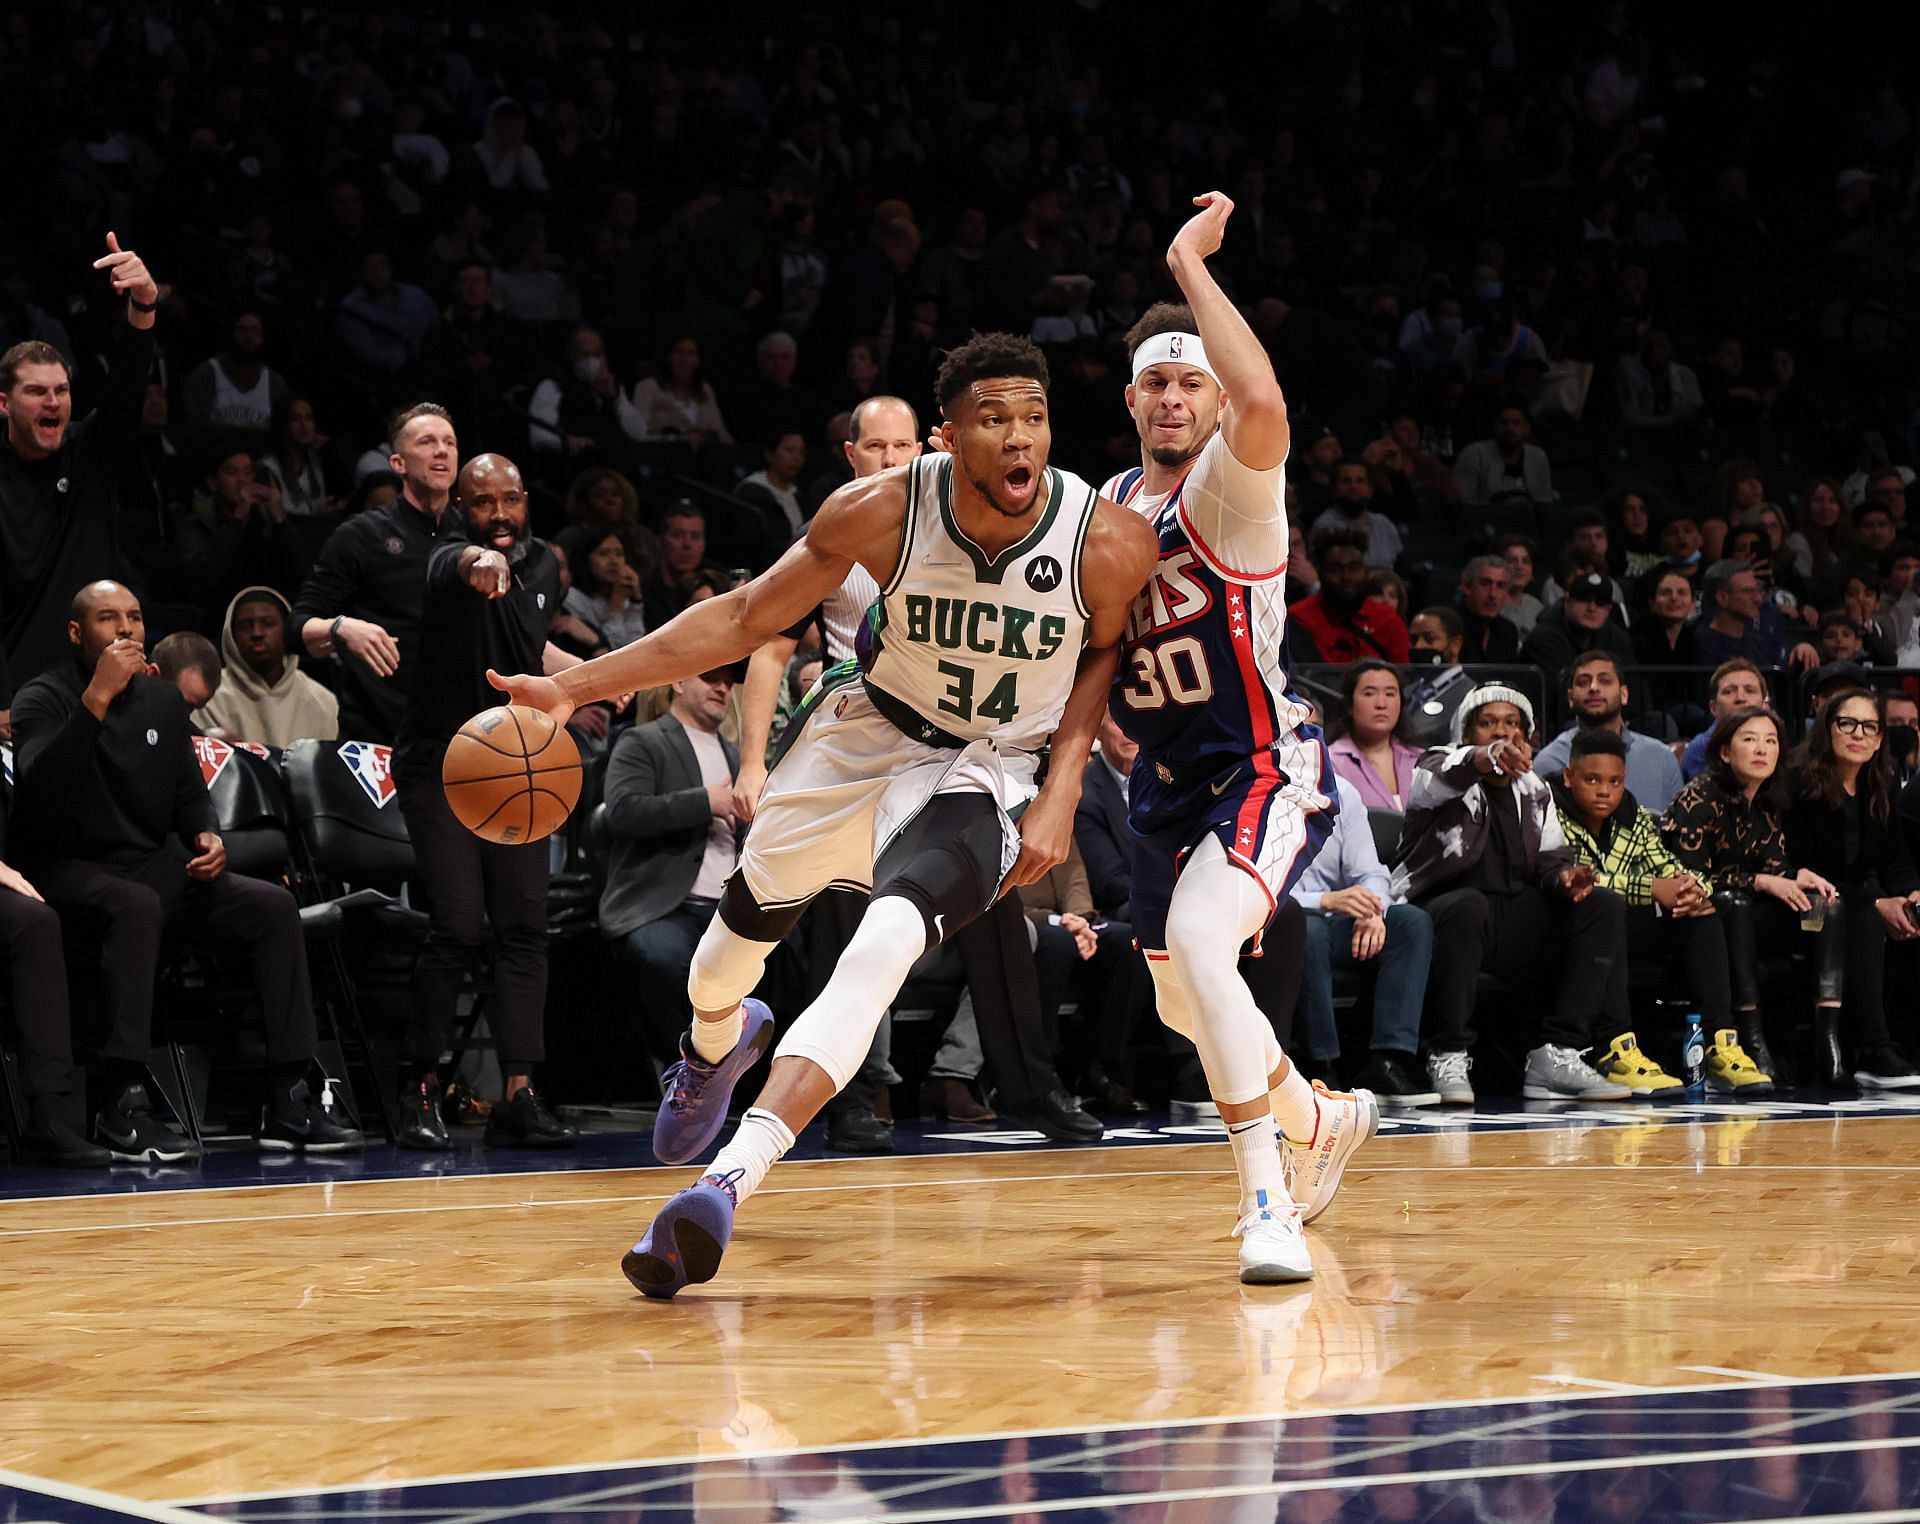 Giannis Antetokounmpo of the Milwaukee Bucks in action against the Brooklyn Nets during their game at Barclays Center on Thursday in New York City.